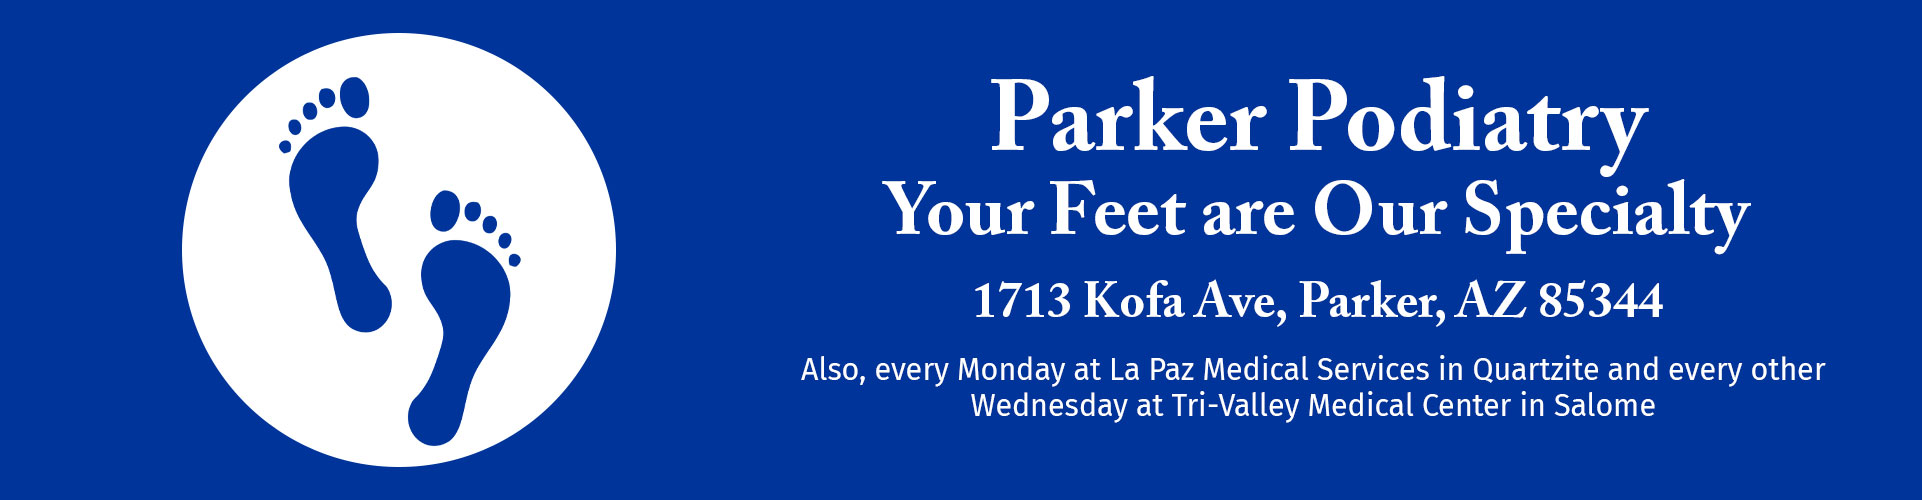 Banner graphic picture of a circle with feet print in it. Banner says:

Parker Podiatry
Your Feet are our Speciality
1713 Kofa Ave, Parker, AZ 85344